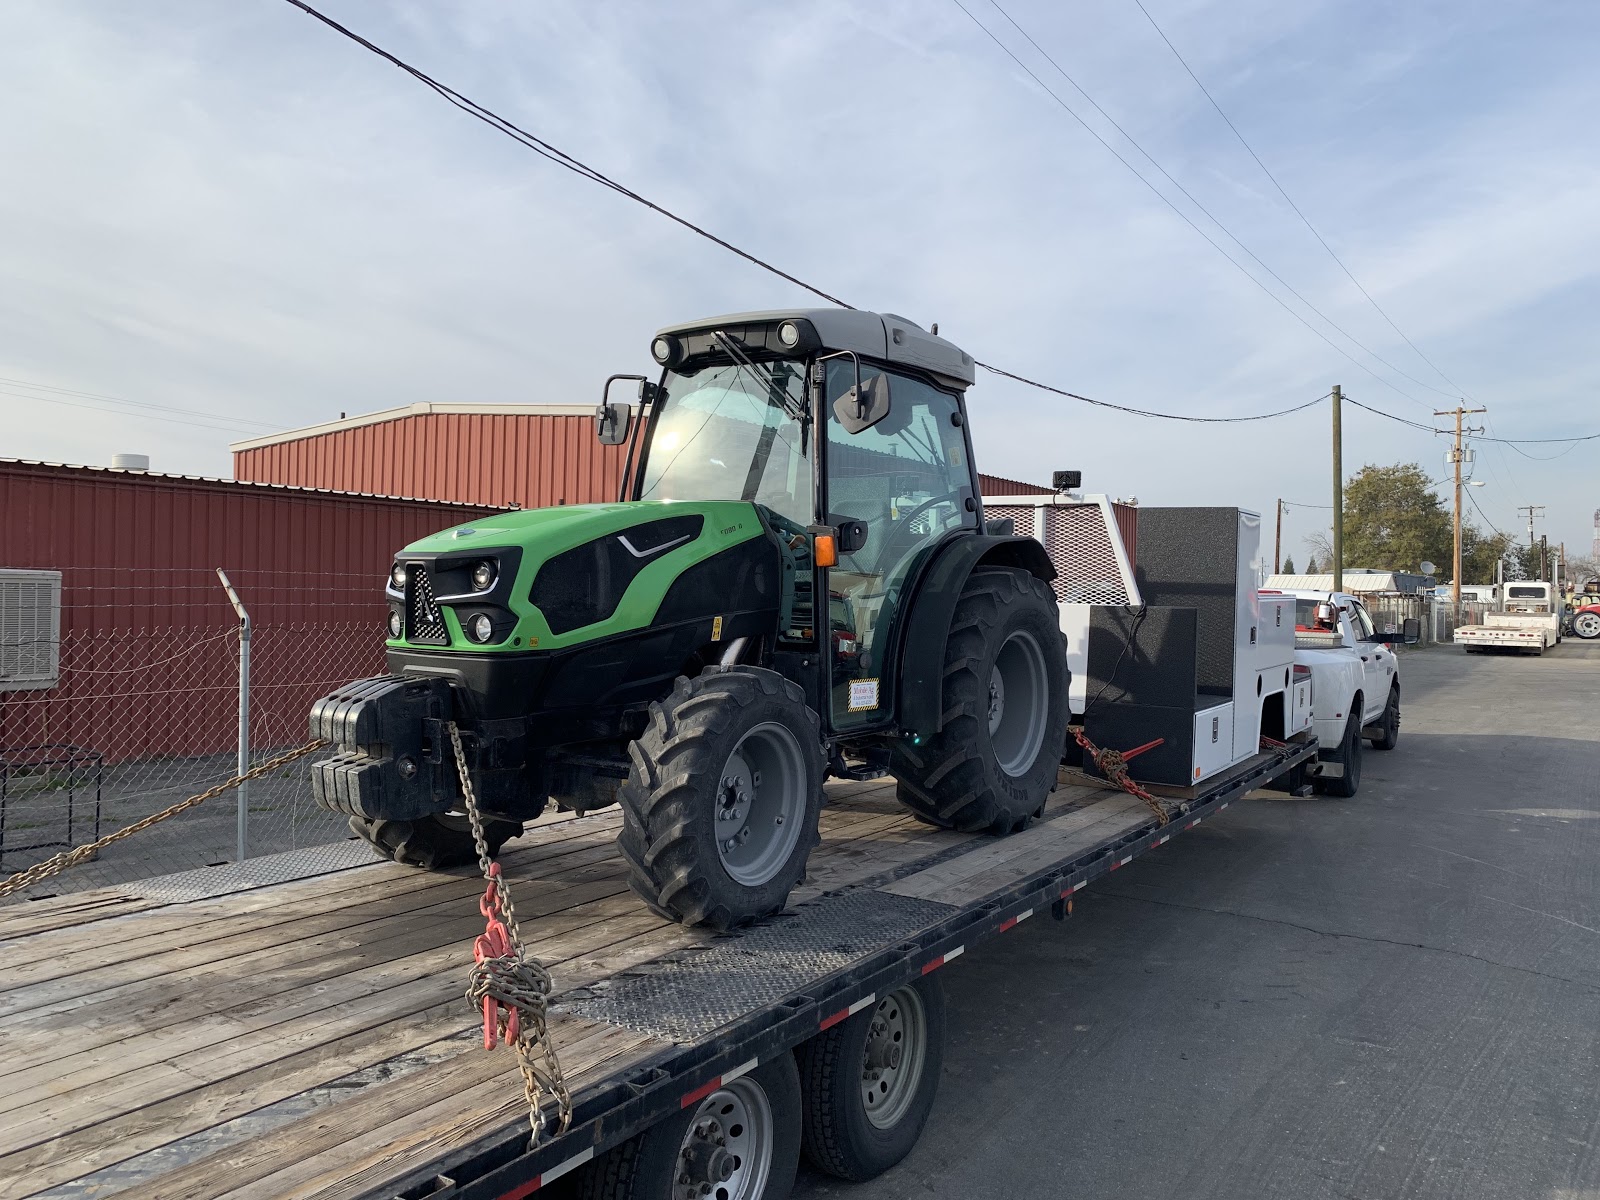 DF 5080 Tractor loaded for transport